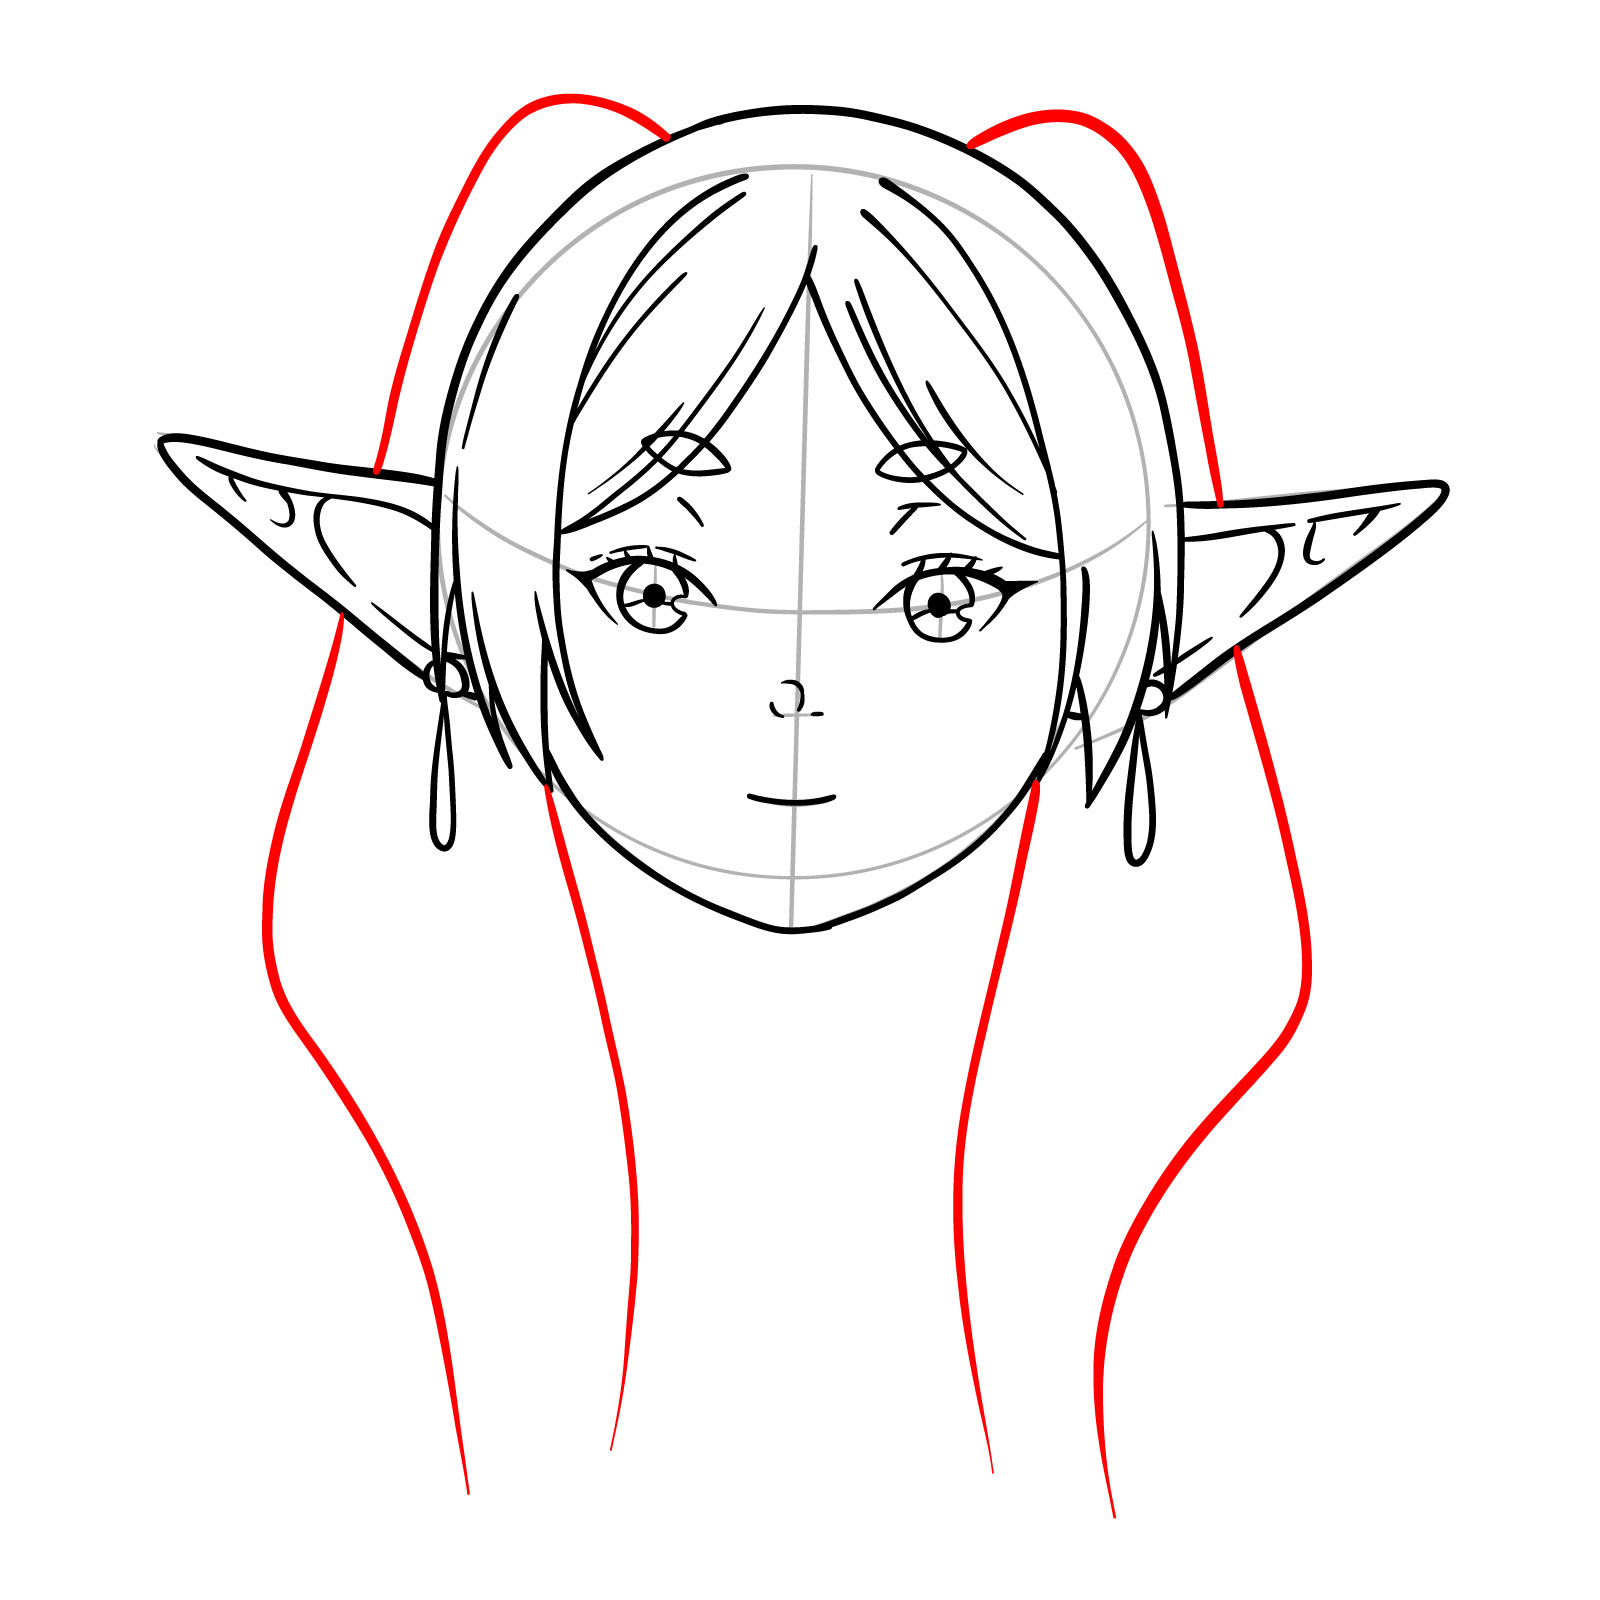 Outline for the start of Frieren's pigtails in the drawing - step 11